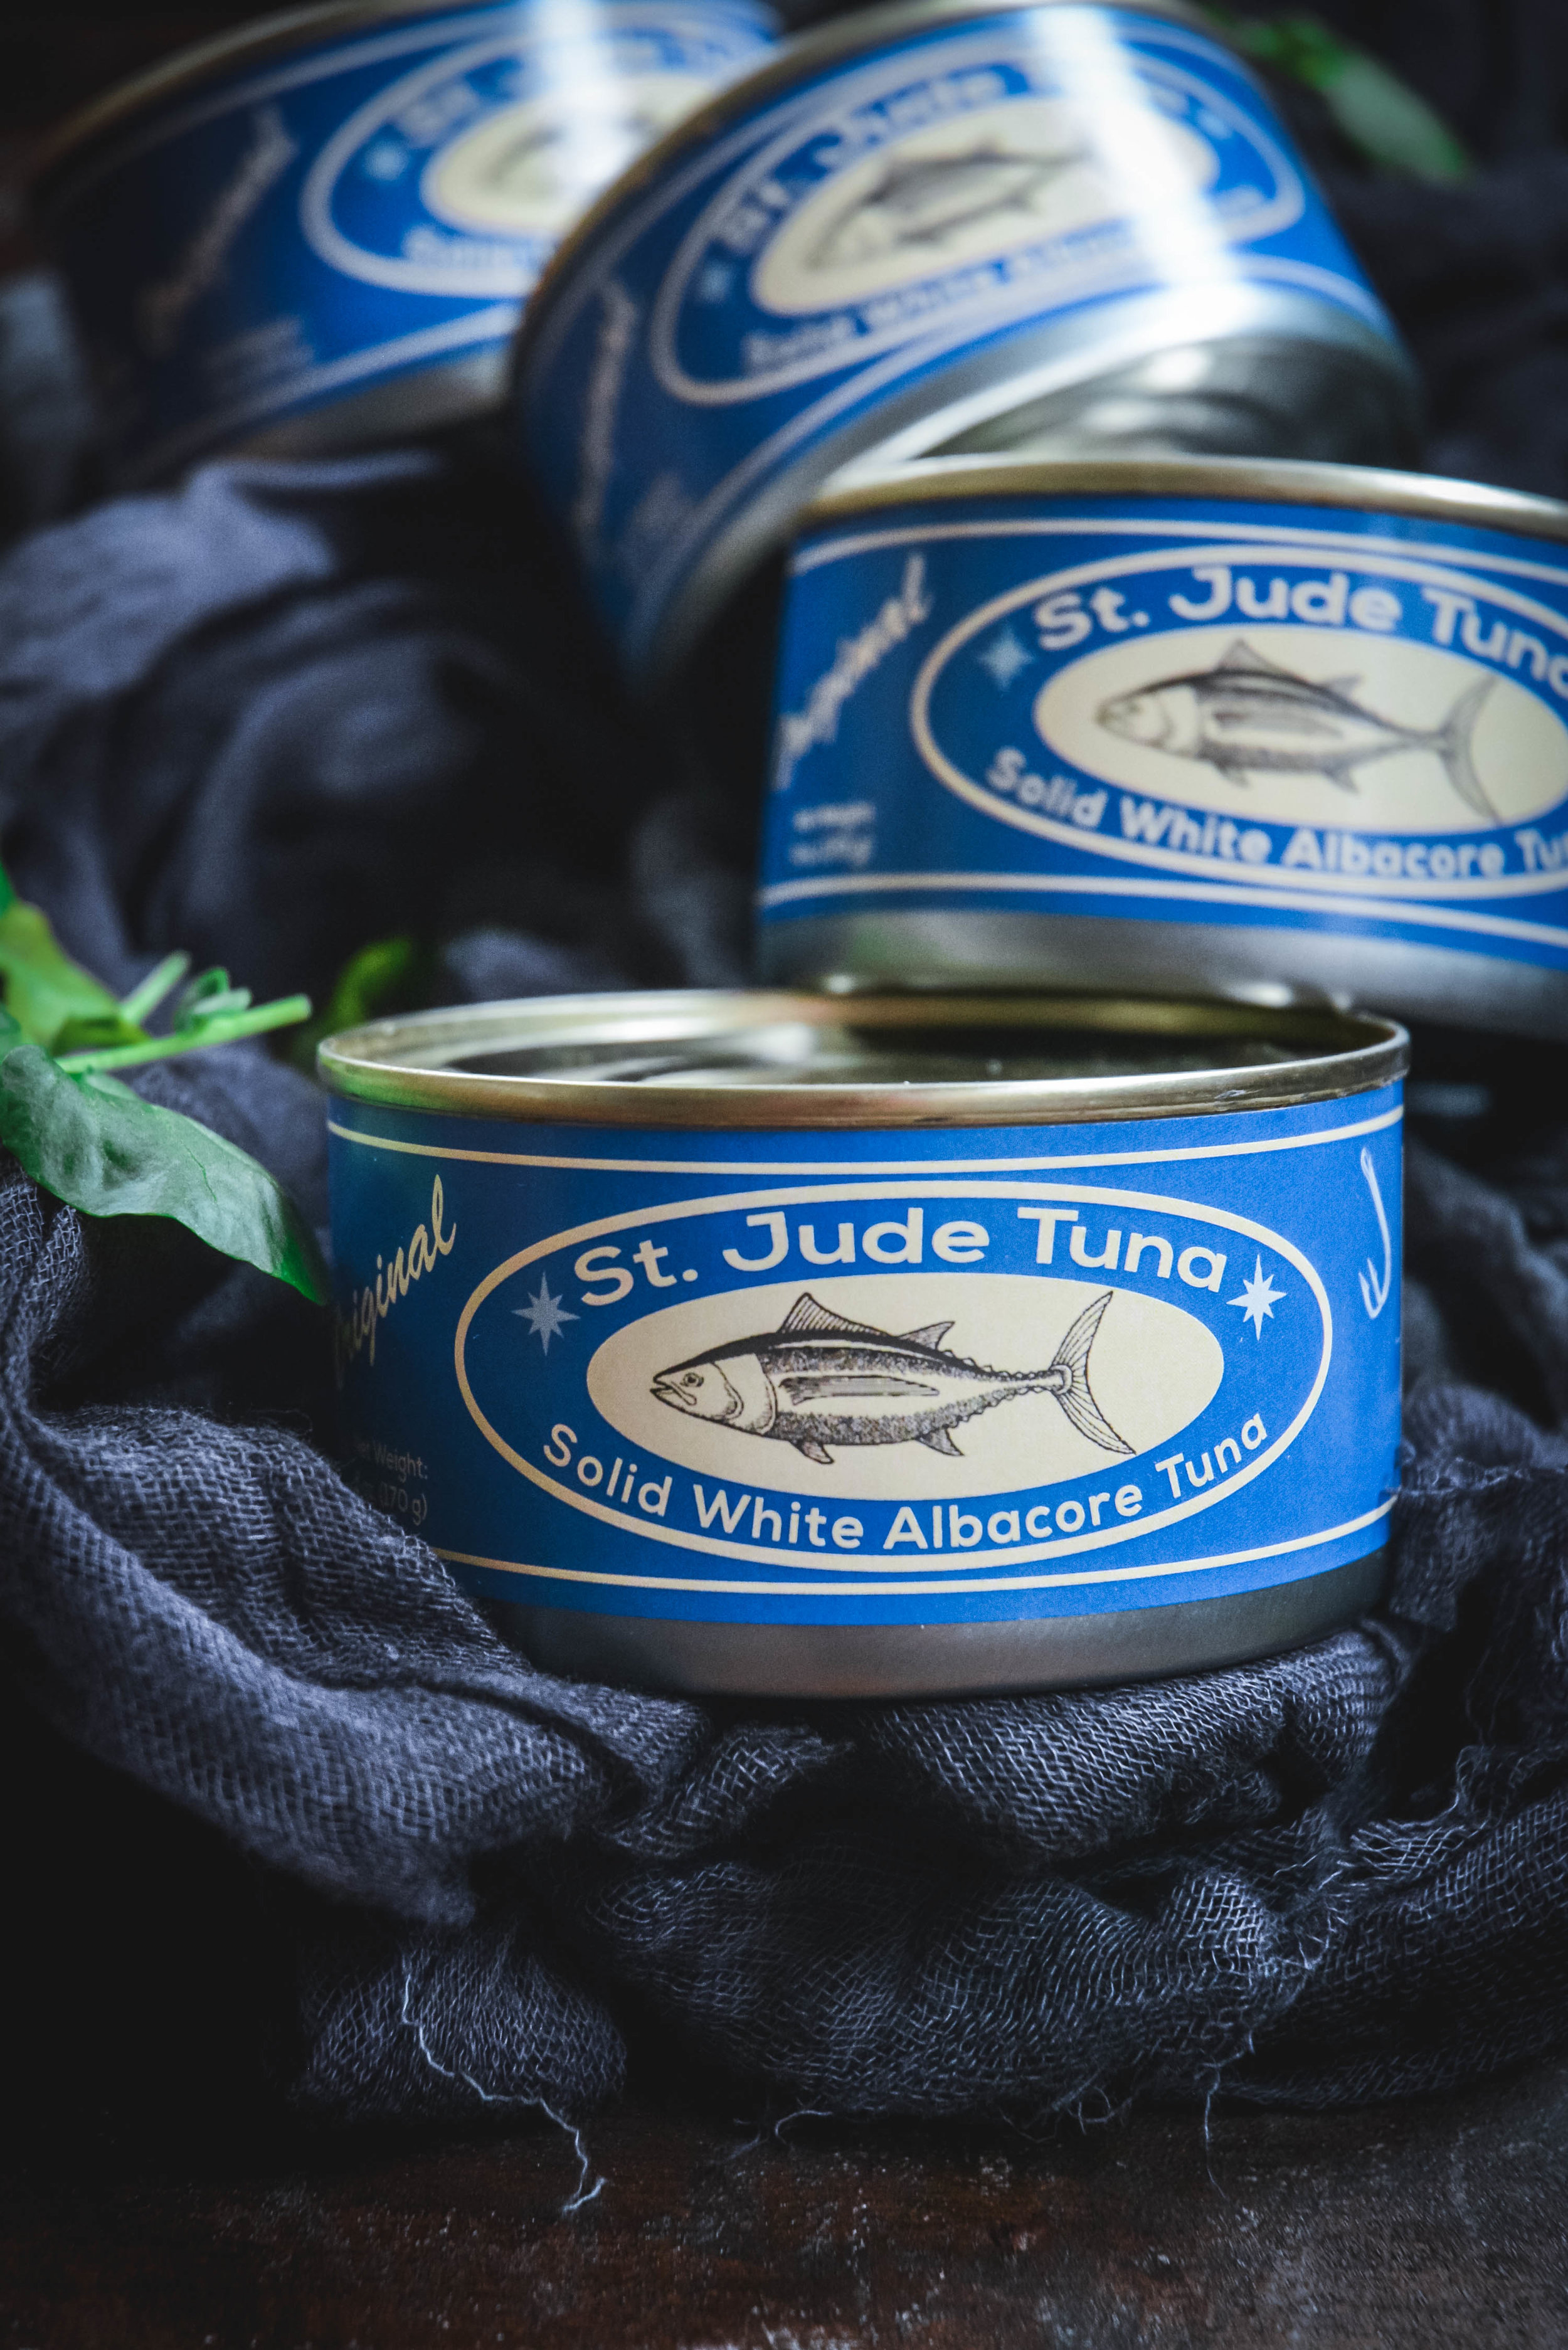 4 cans of st. jude tuna with blue labels